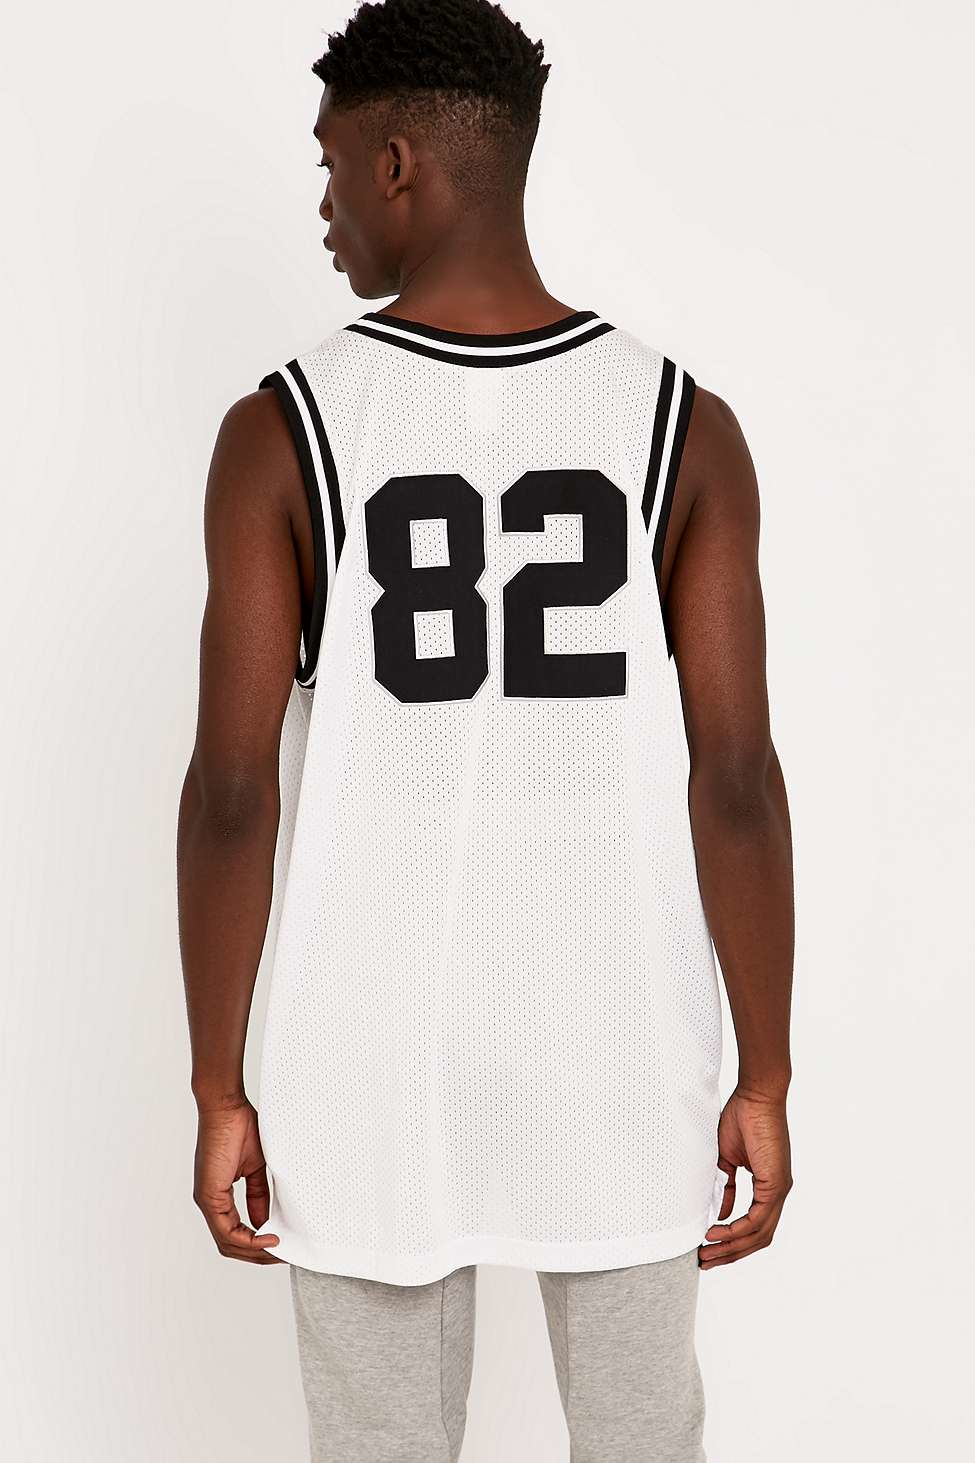 Download Lyst - Nike Retro White Basketball Jersey in White for Men